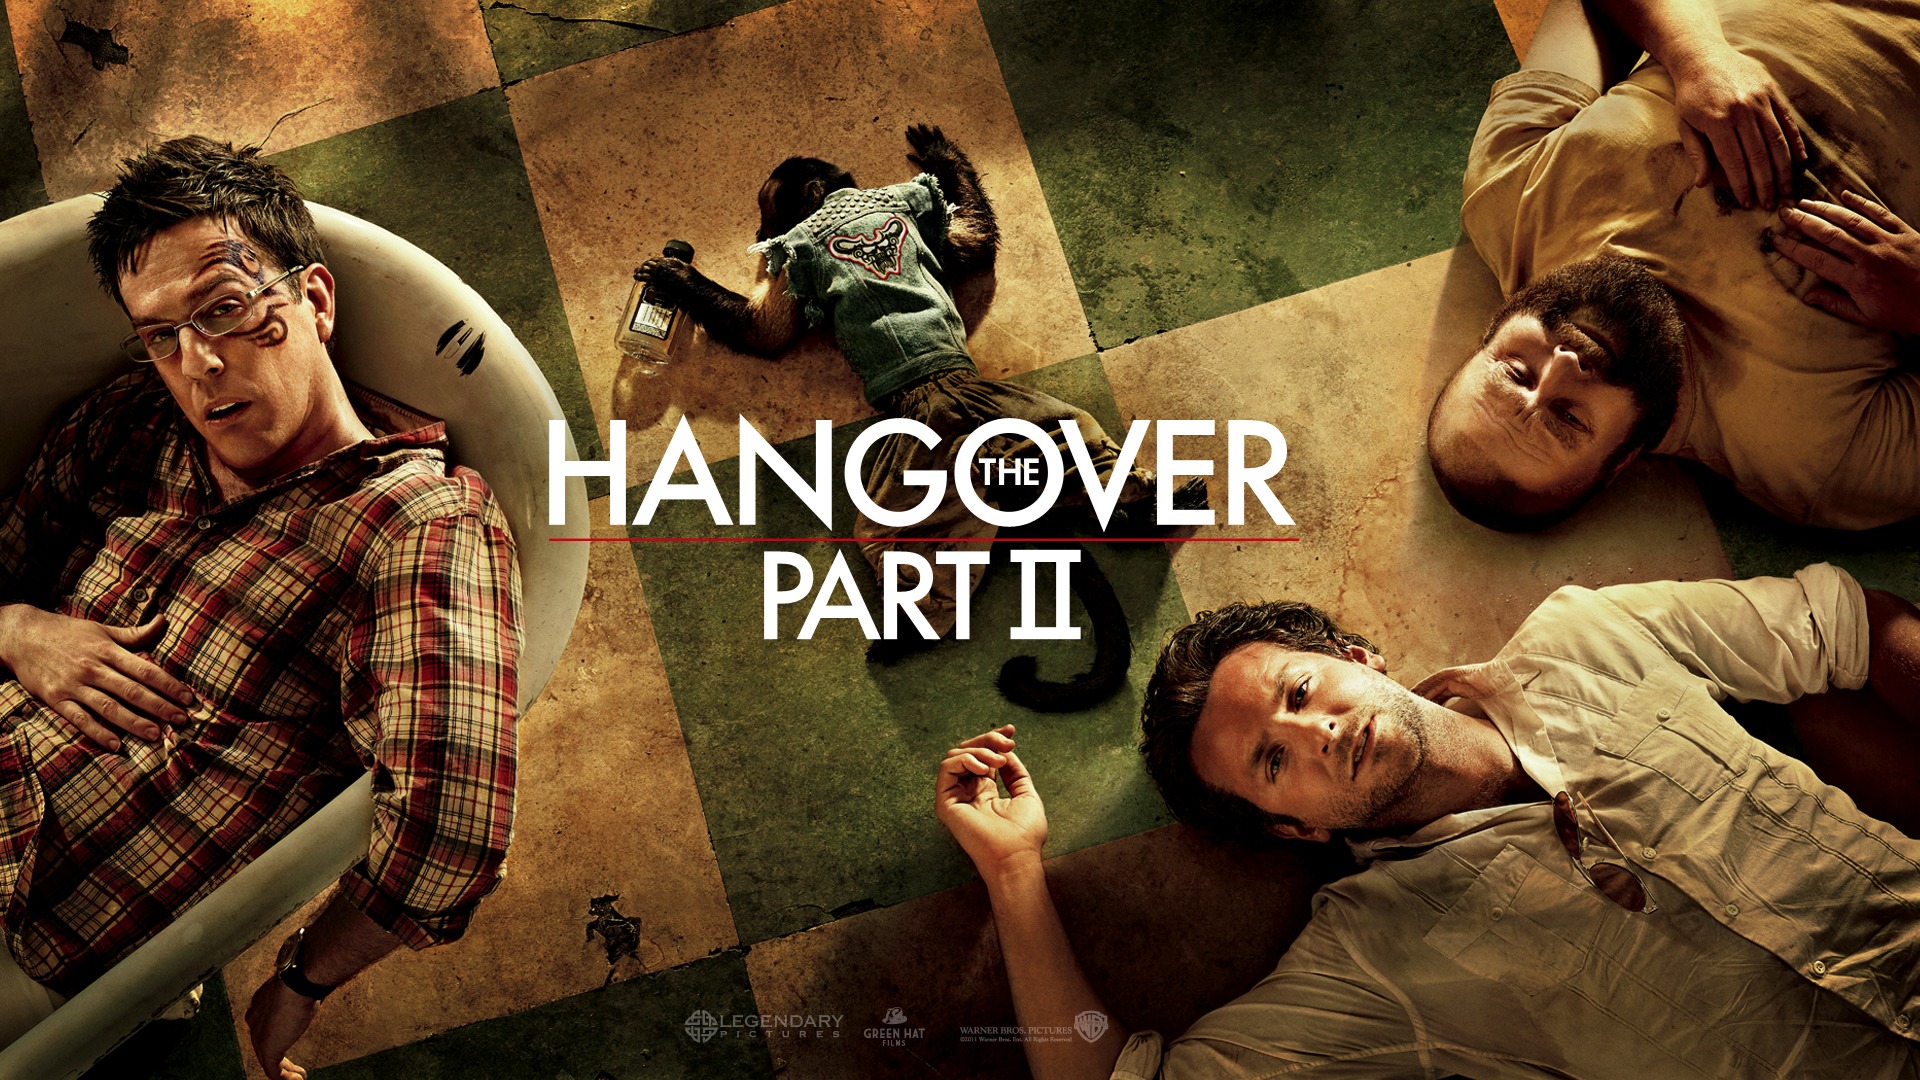 The Hangover Part II wallpapers #1 - 1920x1080